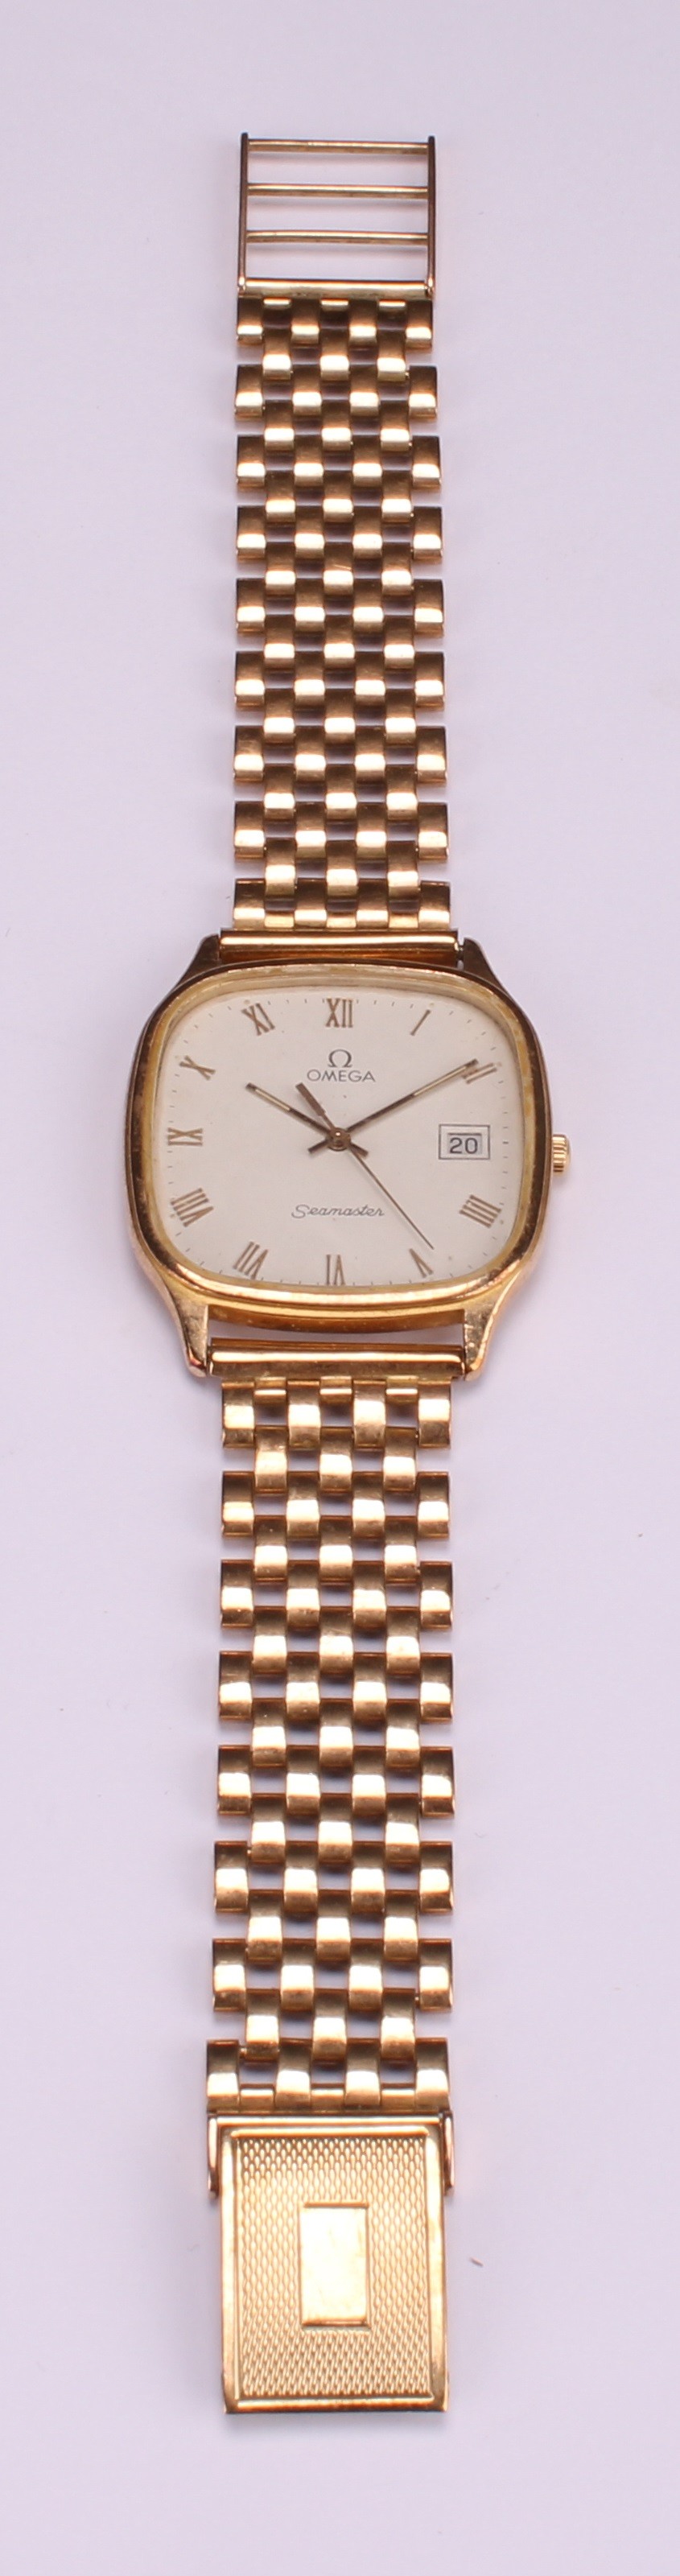 A gentleman's Omega Seamaster 9ct gold watch, rounded square face, Roman numerals, centre seconds - Image 2 of 4